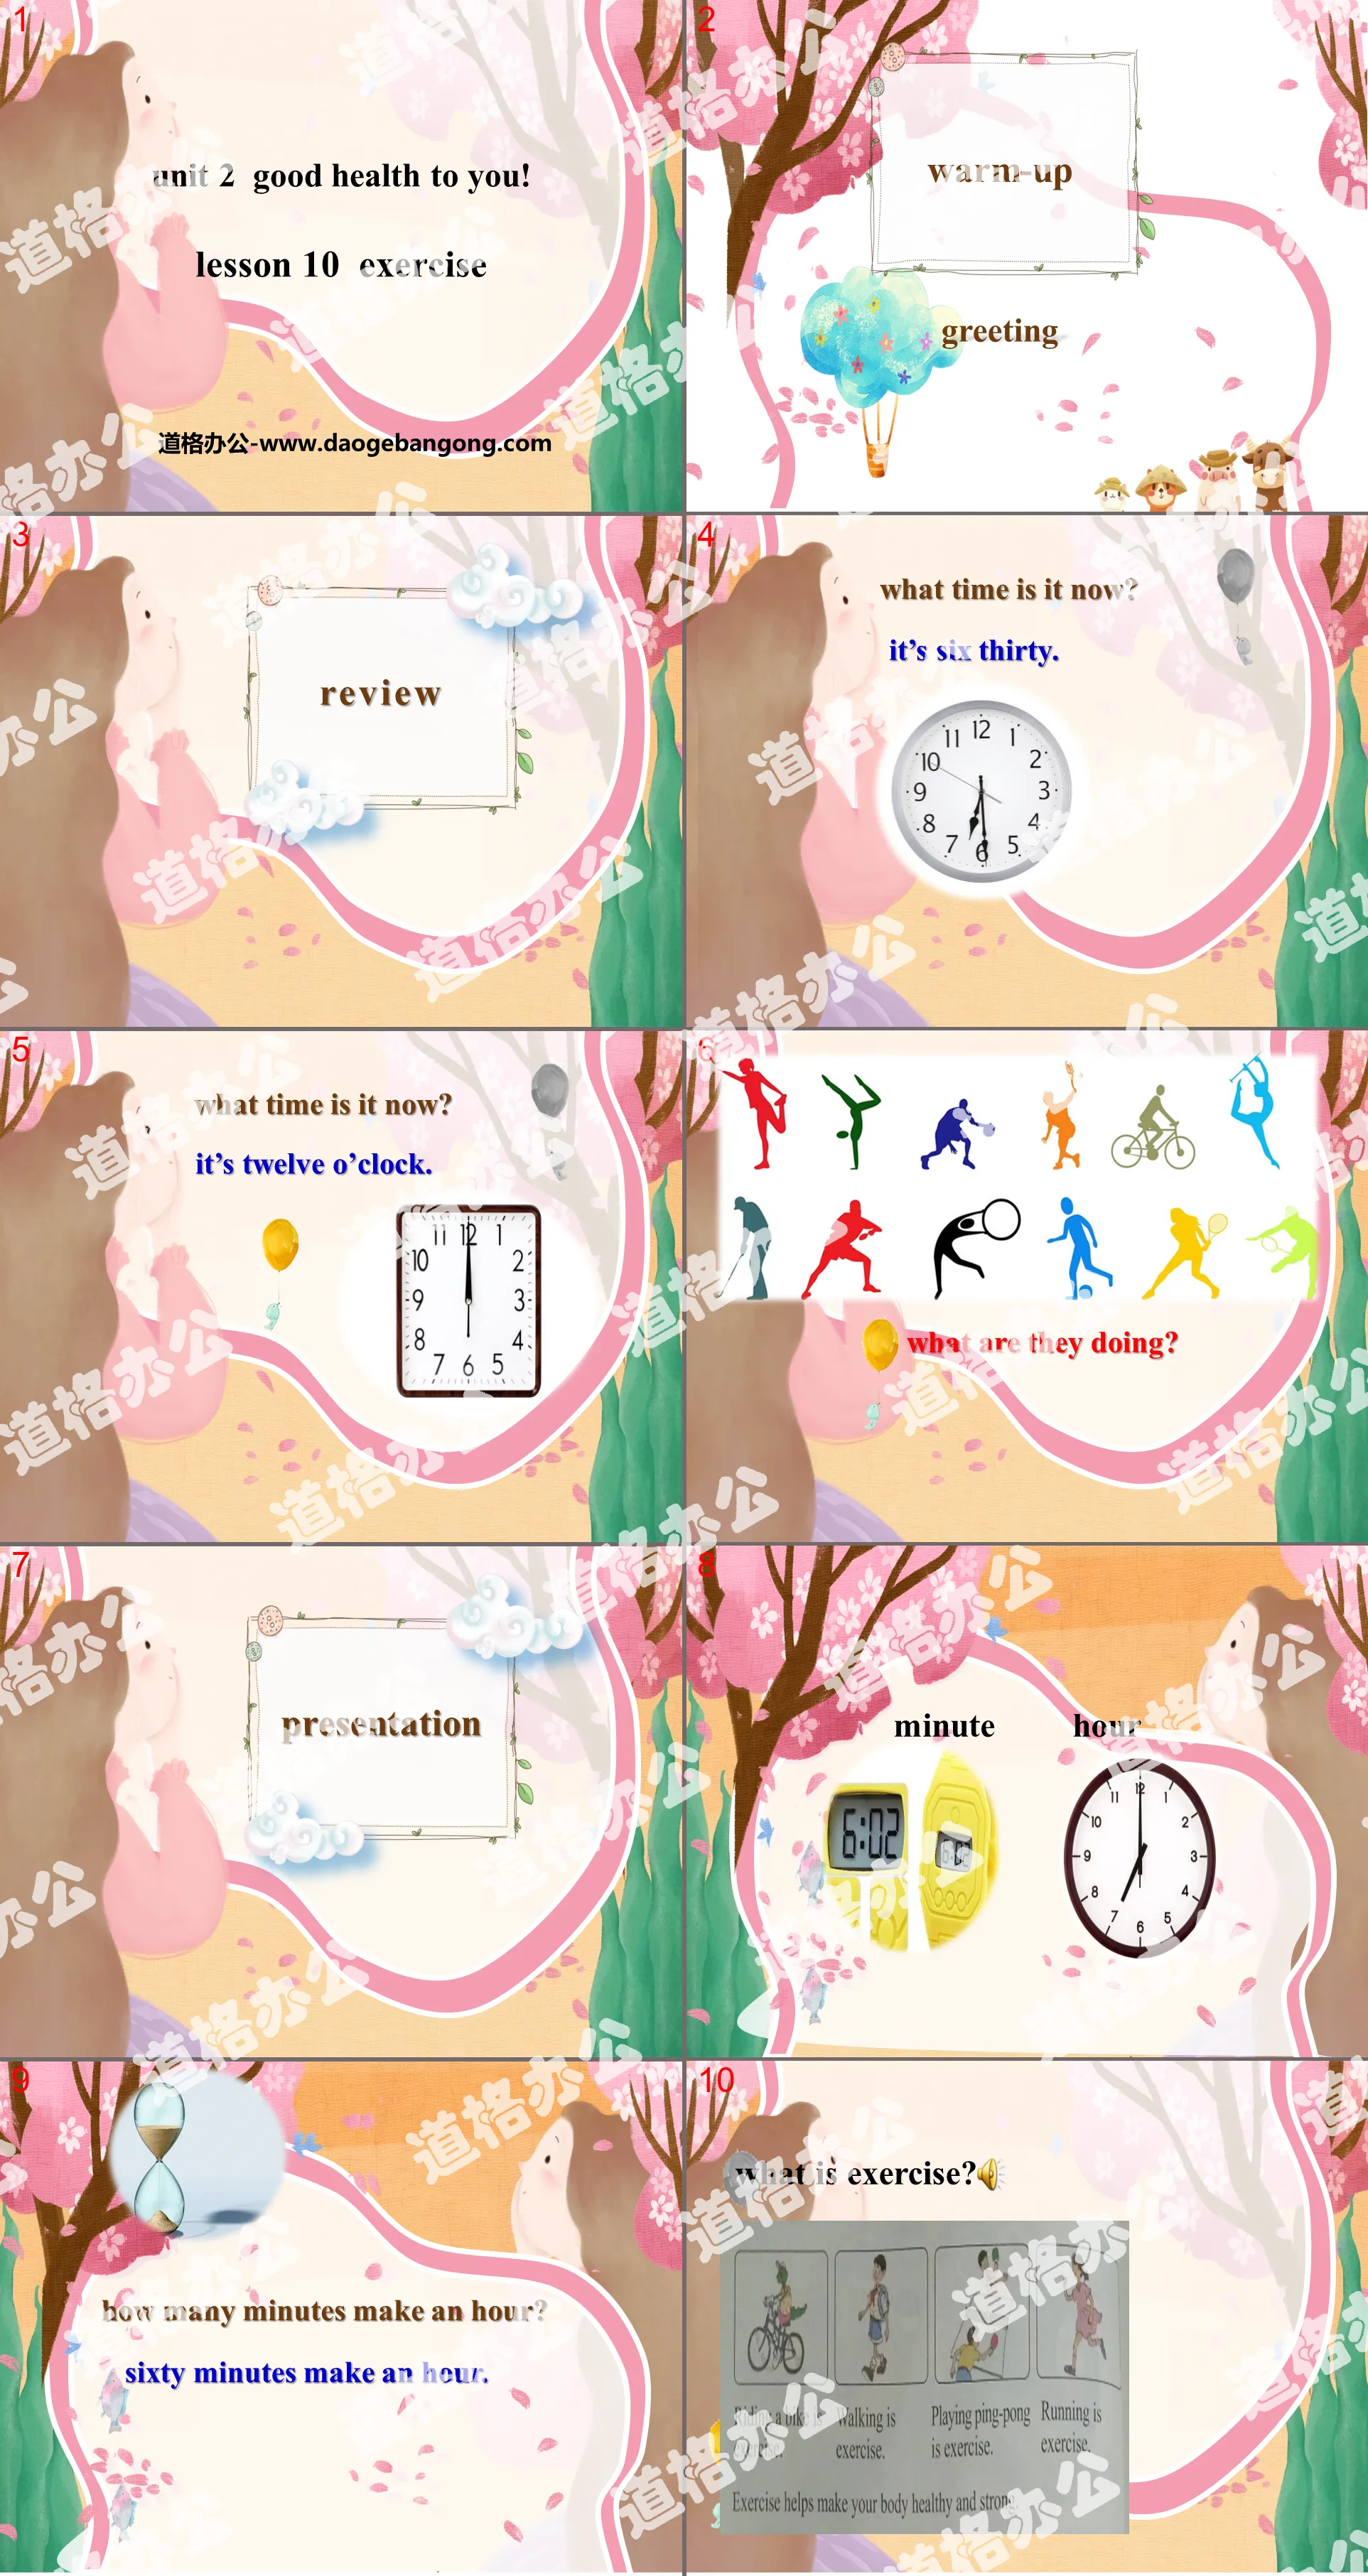 《Exercise》Good Health to You! PPT
